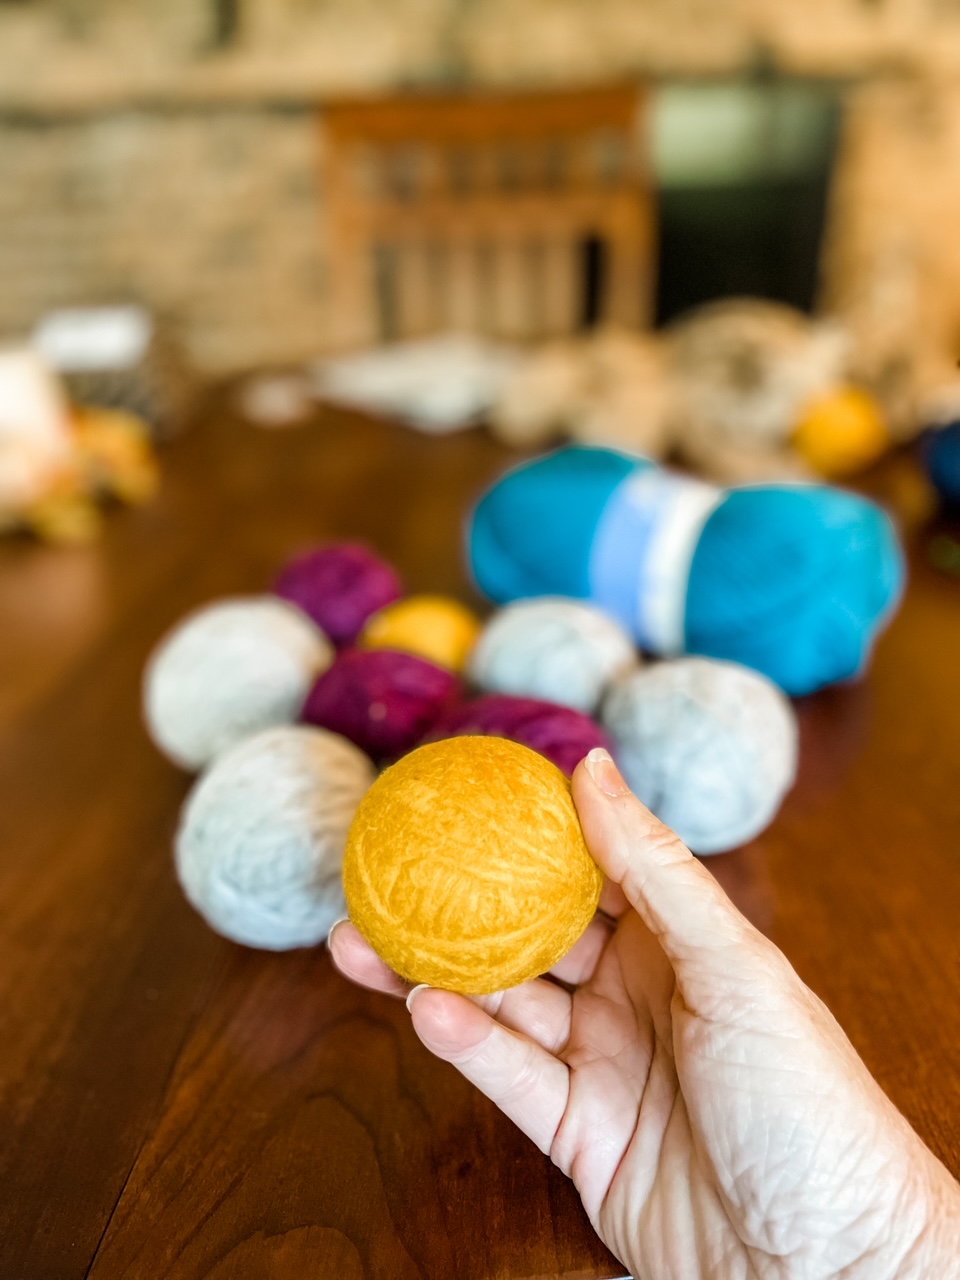 A hand holding up a yellow ball in front of several other DIY Yarn Dryer Balls on a table